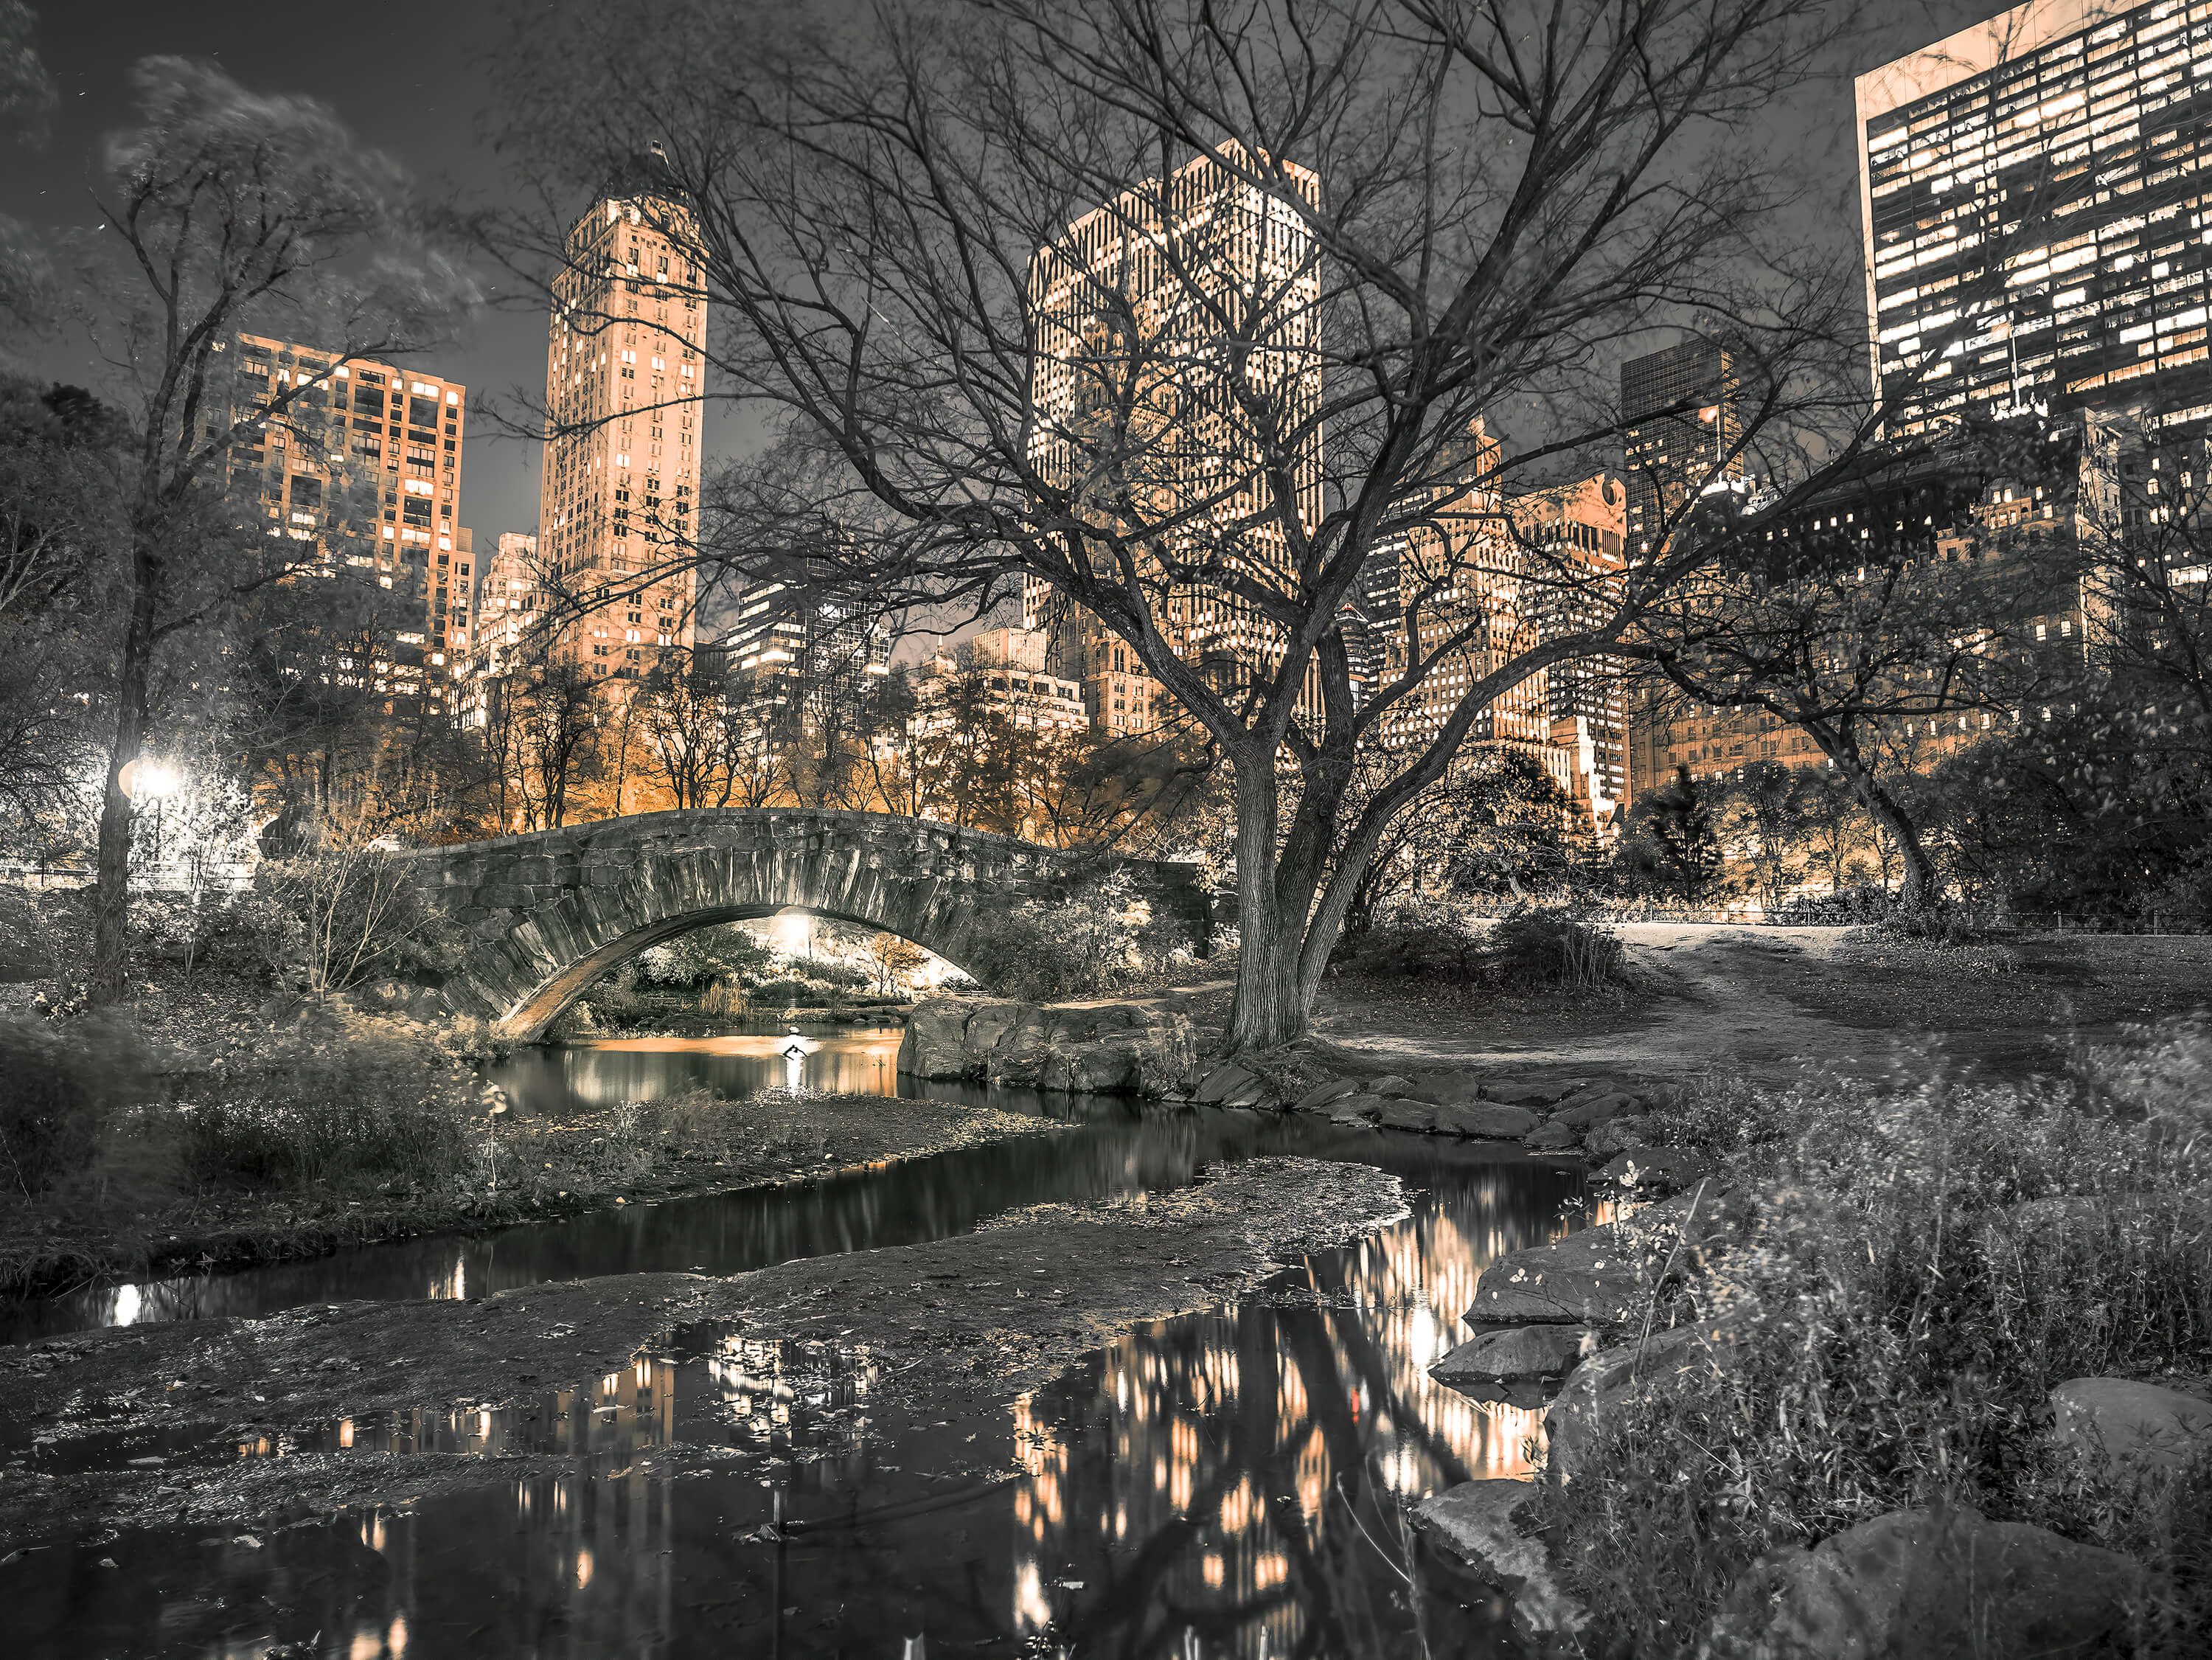  Central park in the evening